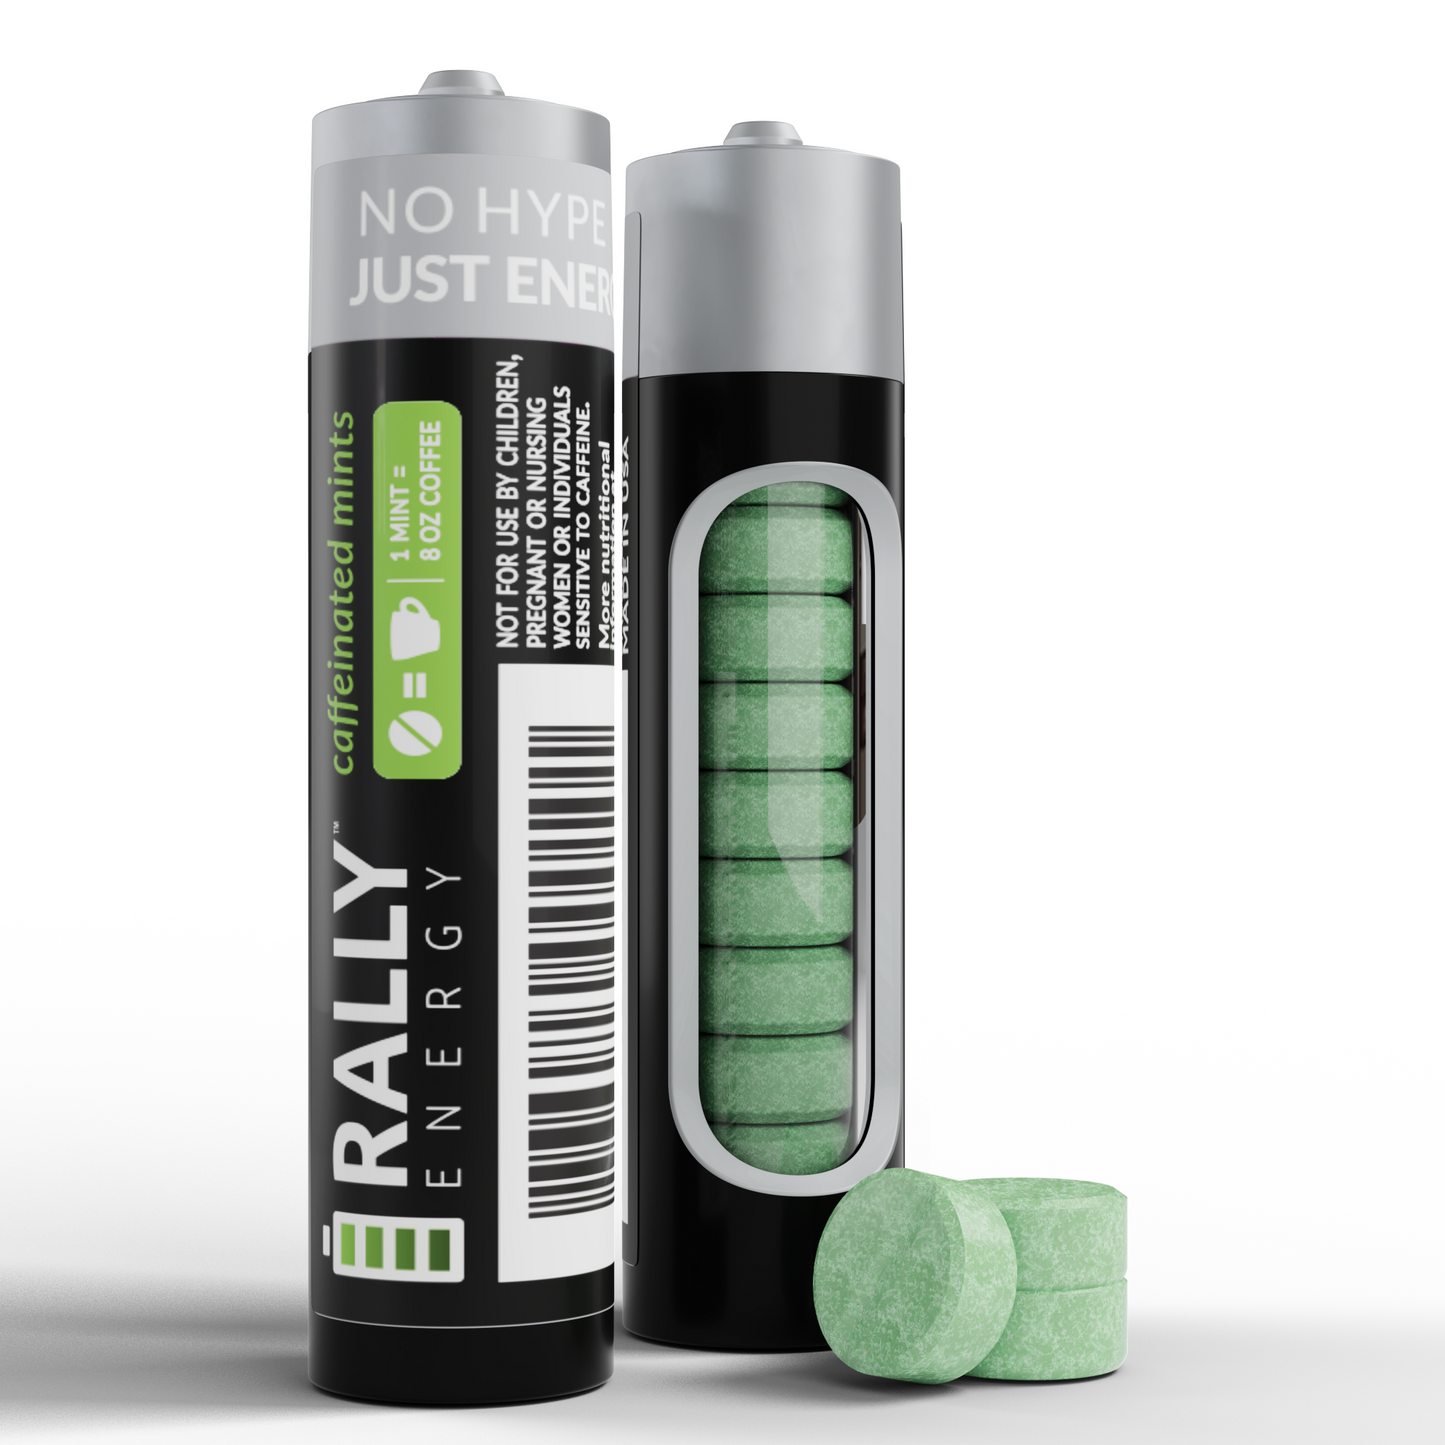 Caffeinated Mints - An instant caffeinated kick and fresh breath, on-demand.